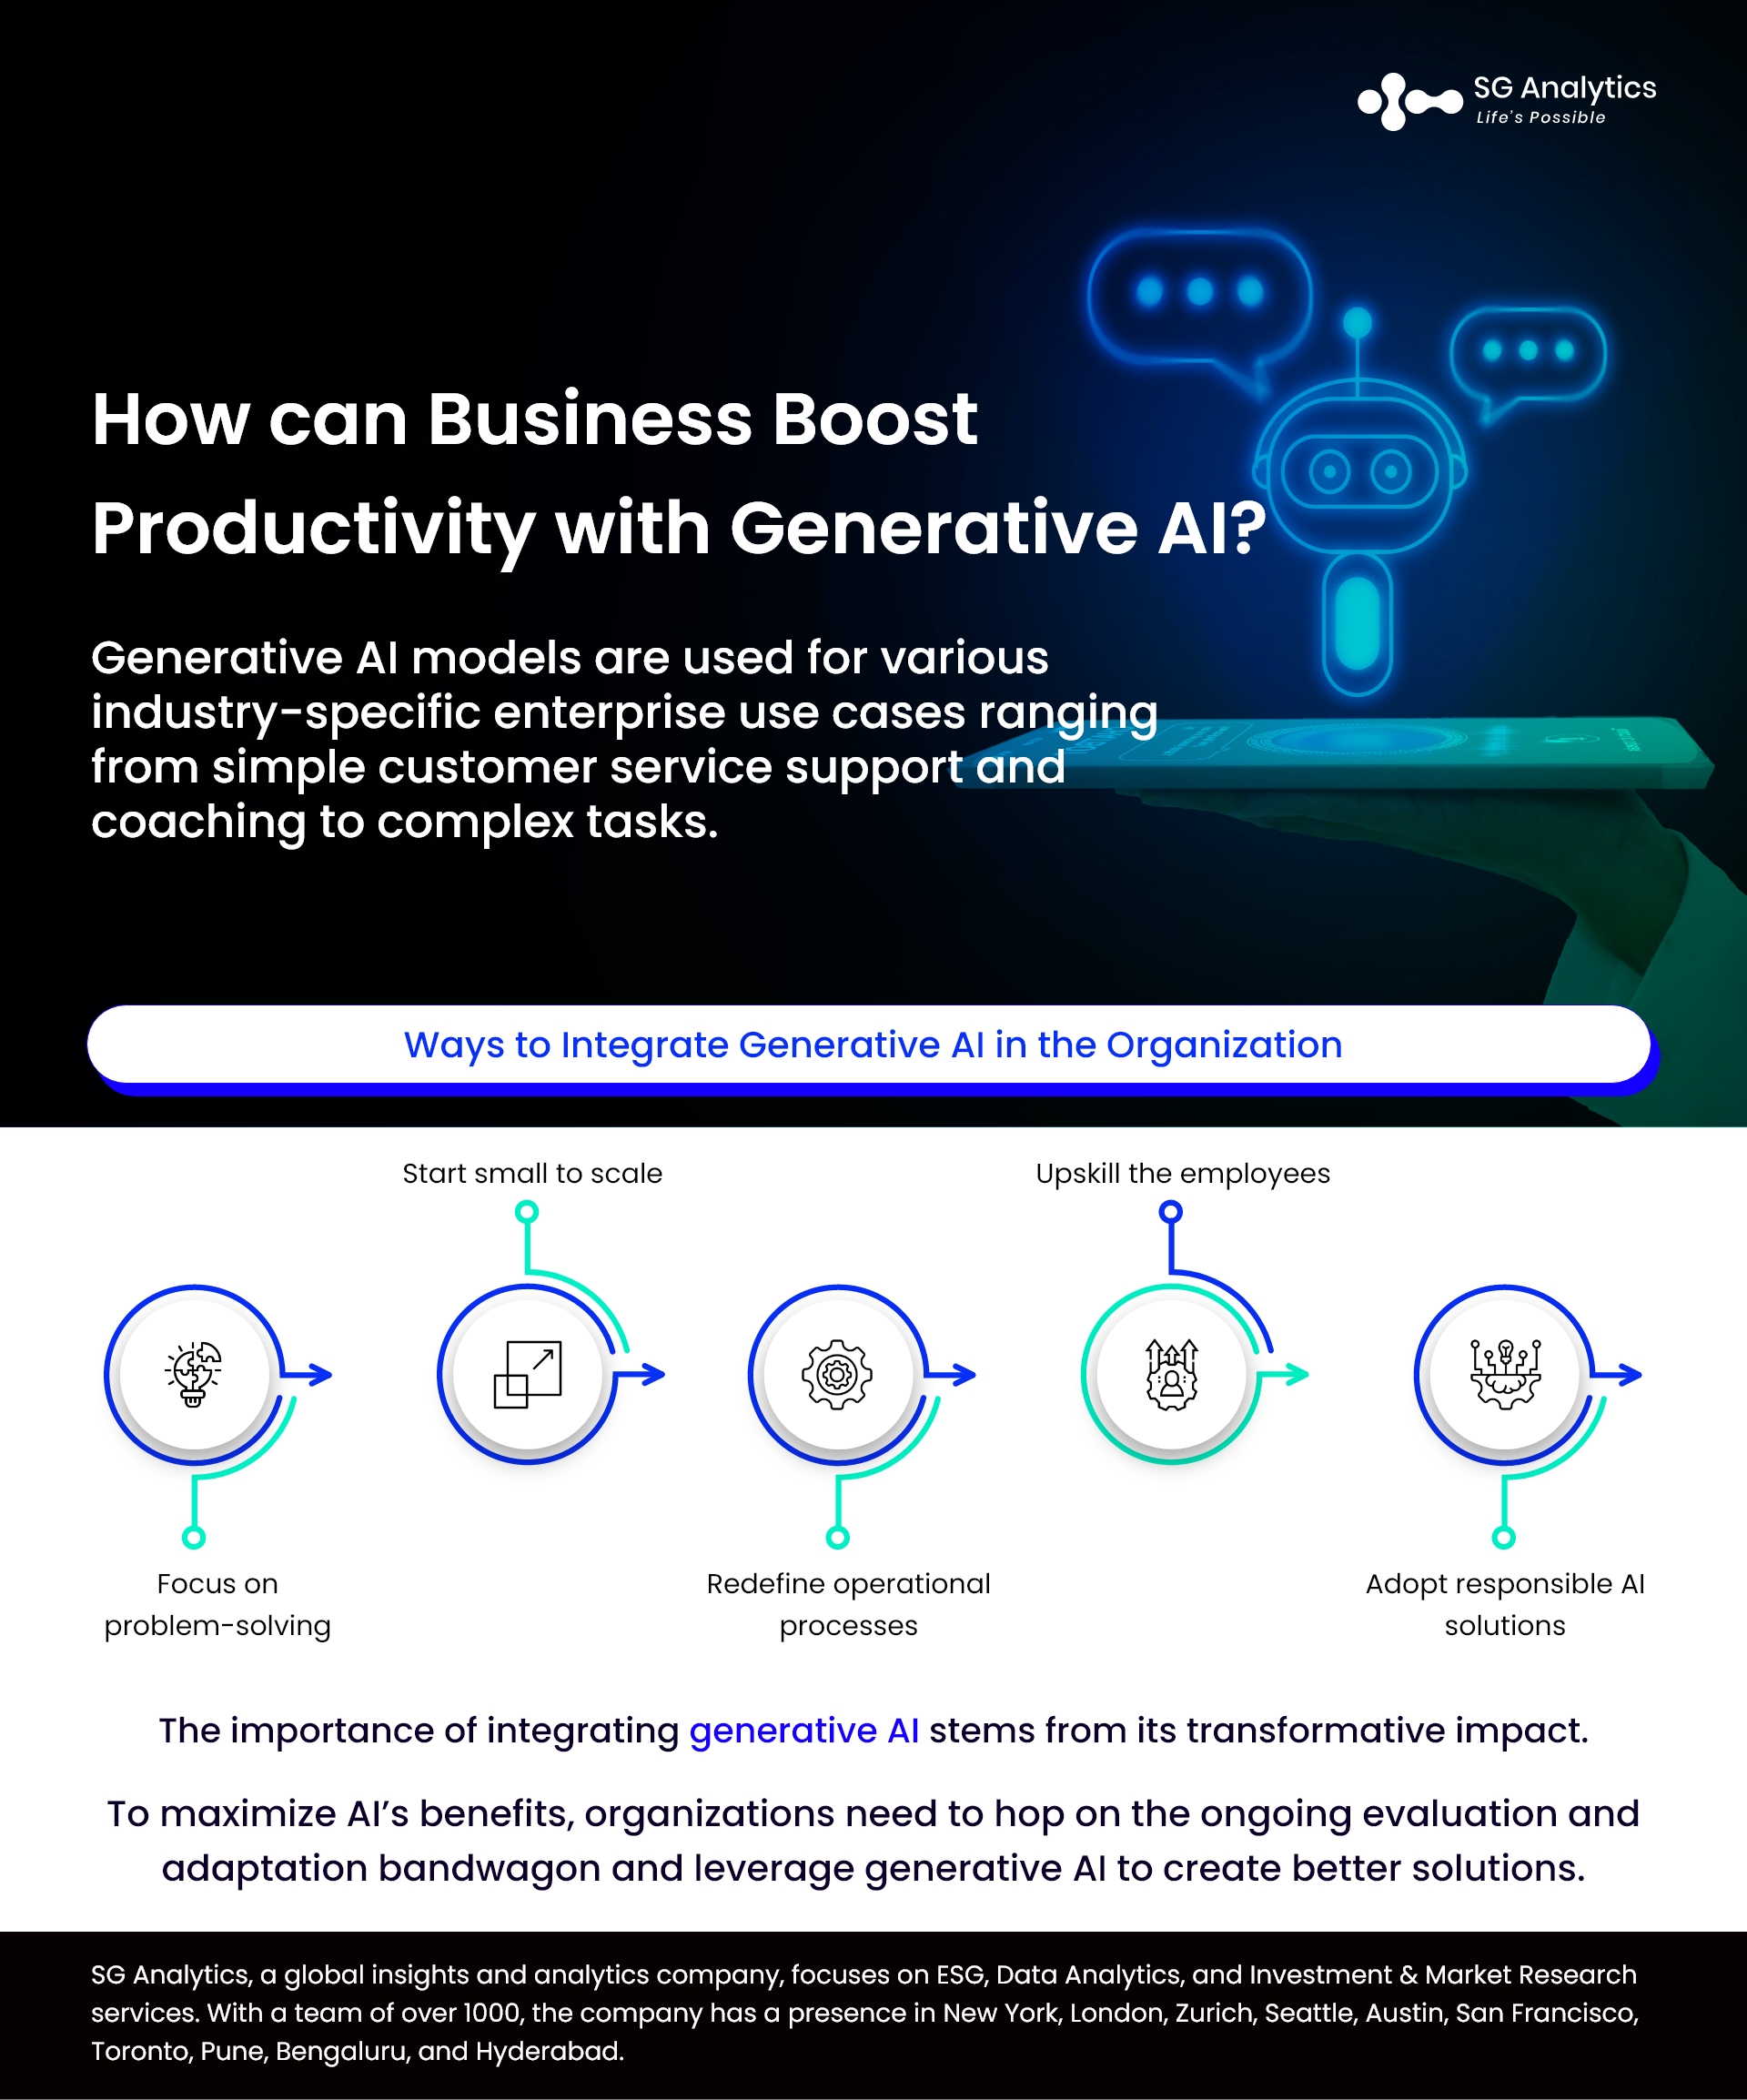 How can Business Boost Productivity with Generative AI